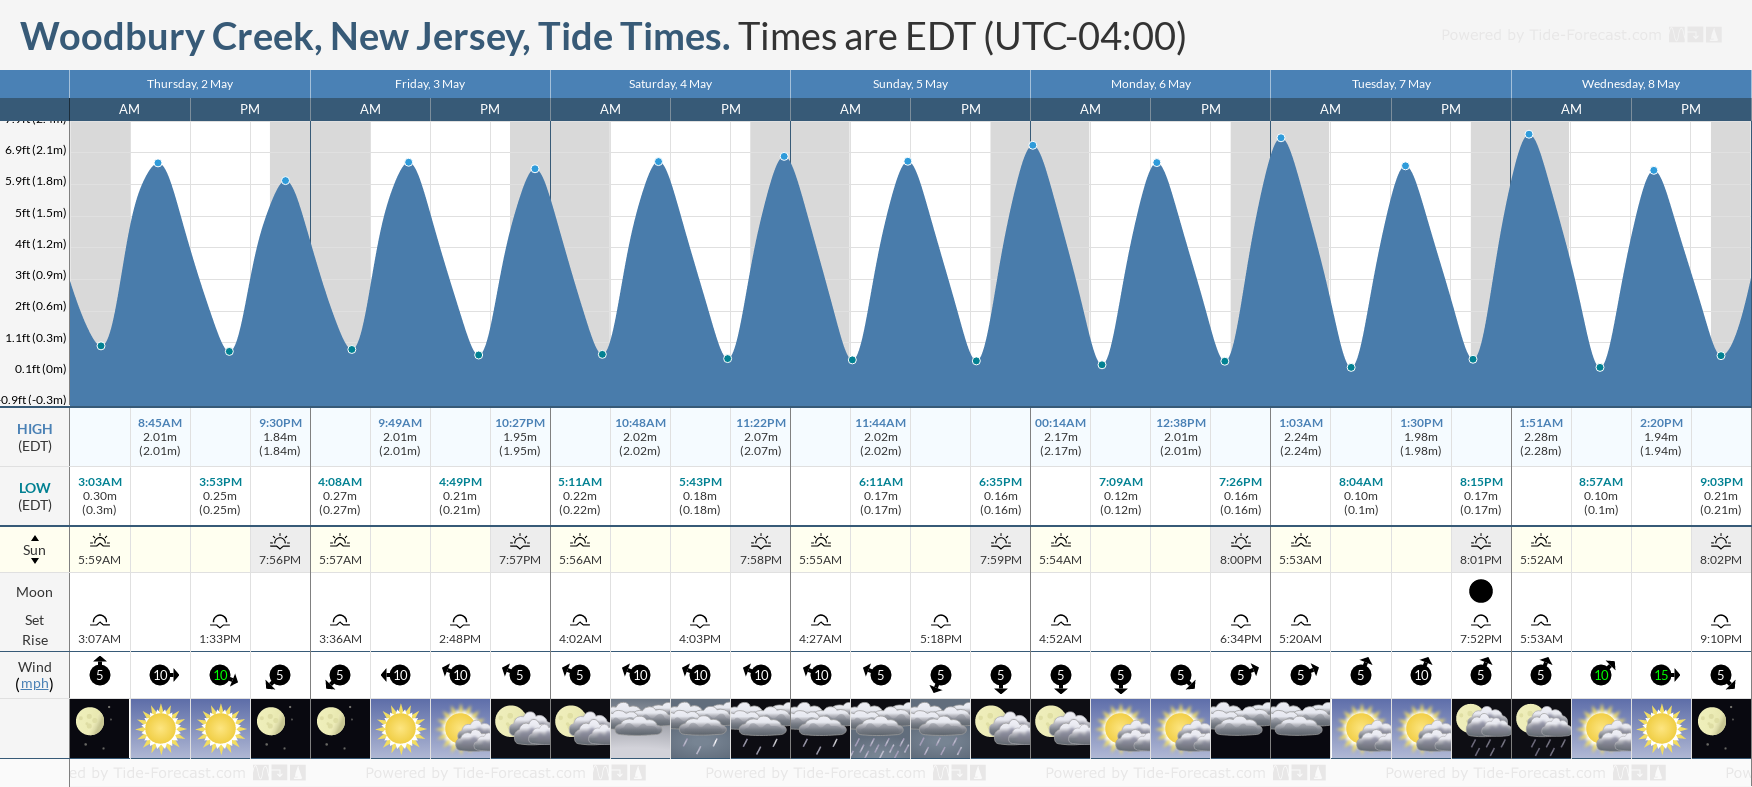 Woodbury Creek, New Jersey Tide Chart including high and low tide tide times for the next 7 days